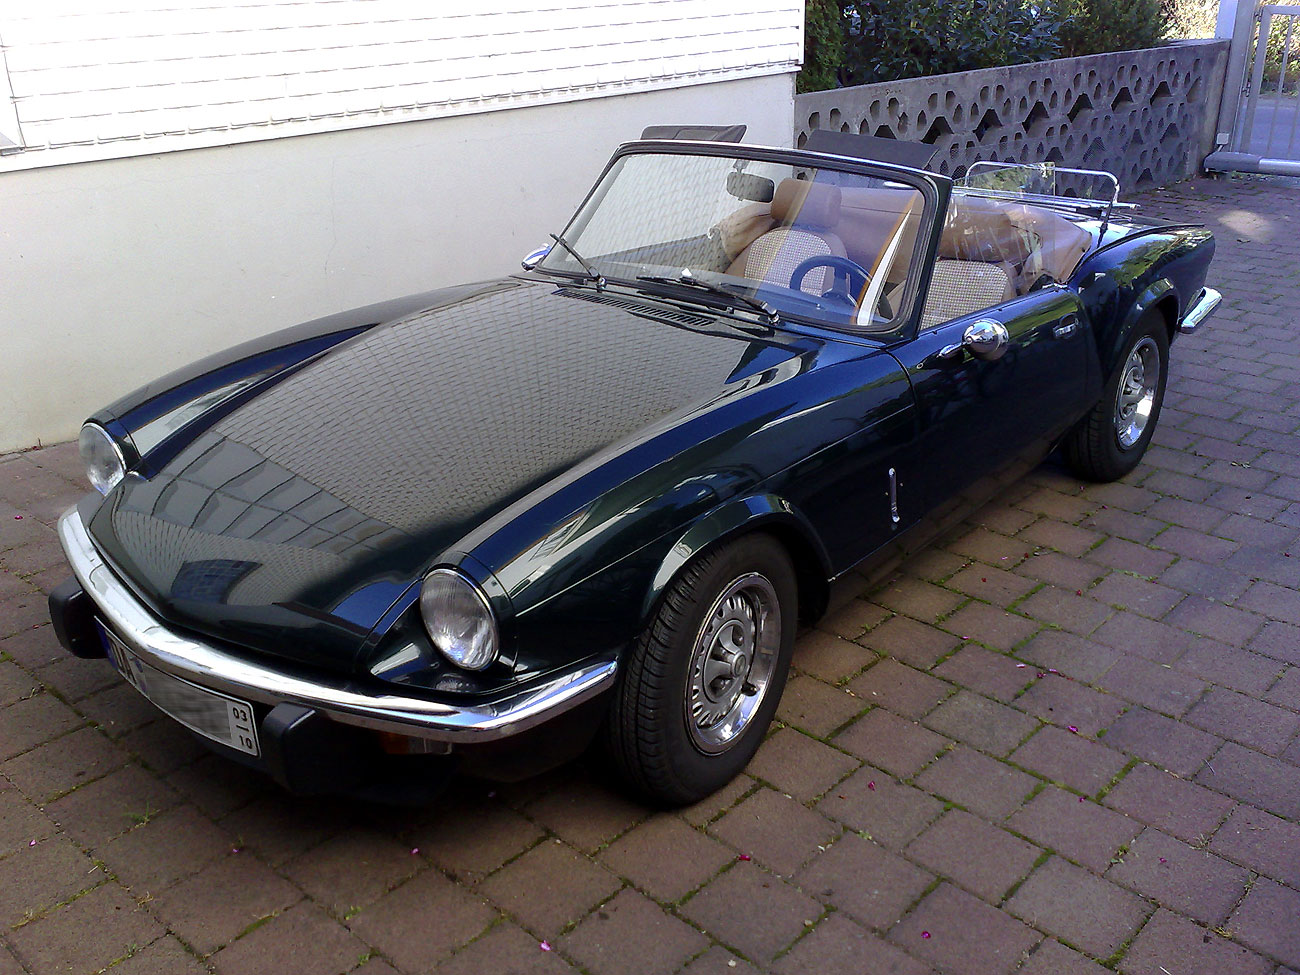 Triumph spitfire 1500 - huge collection of cars, auto news and ...